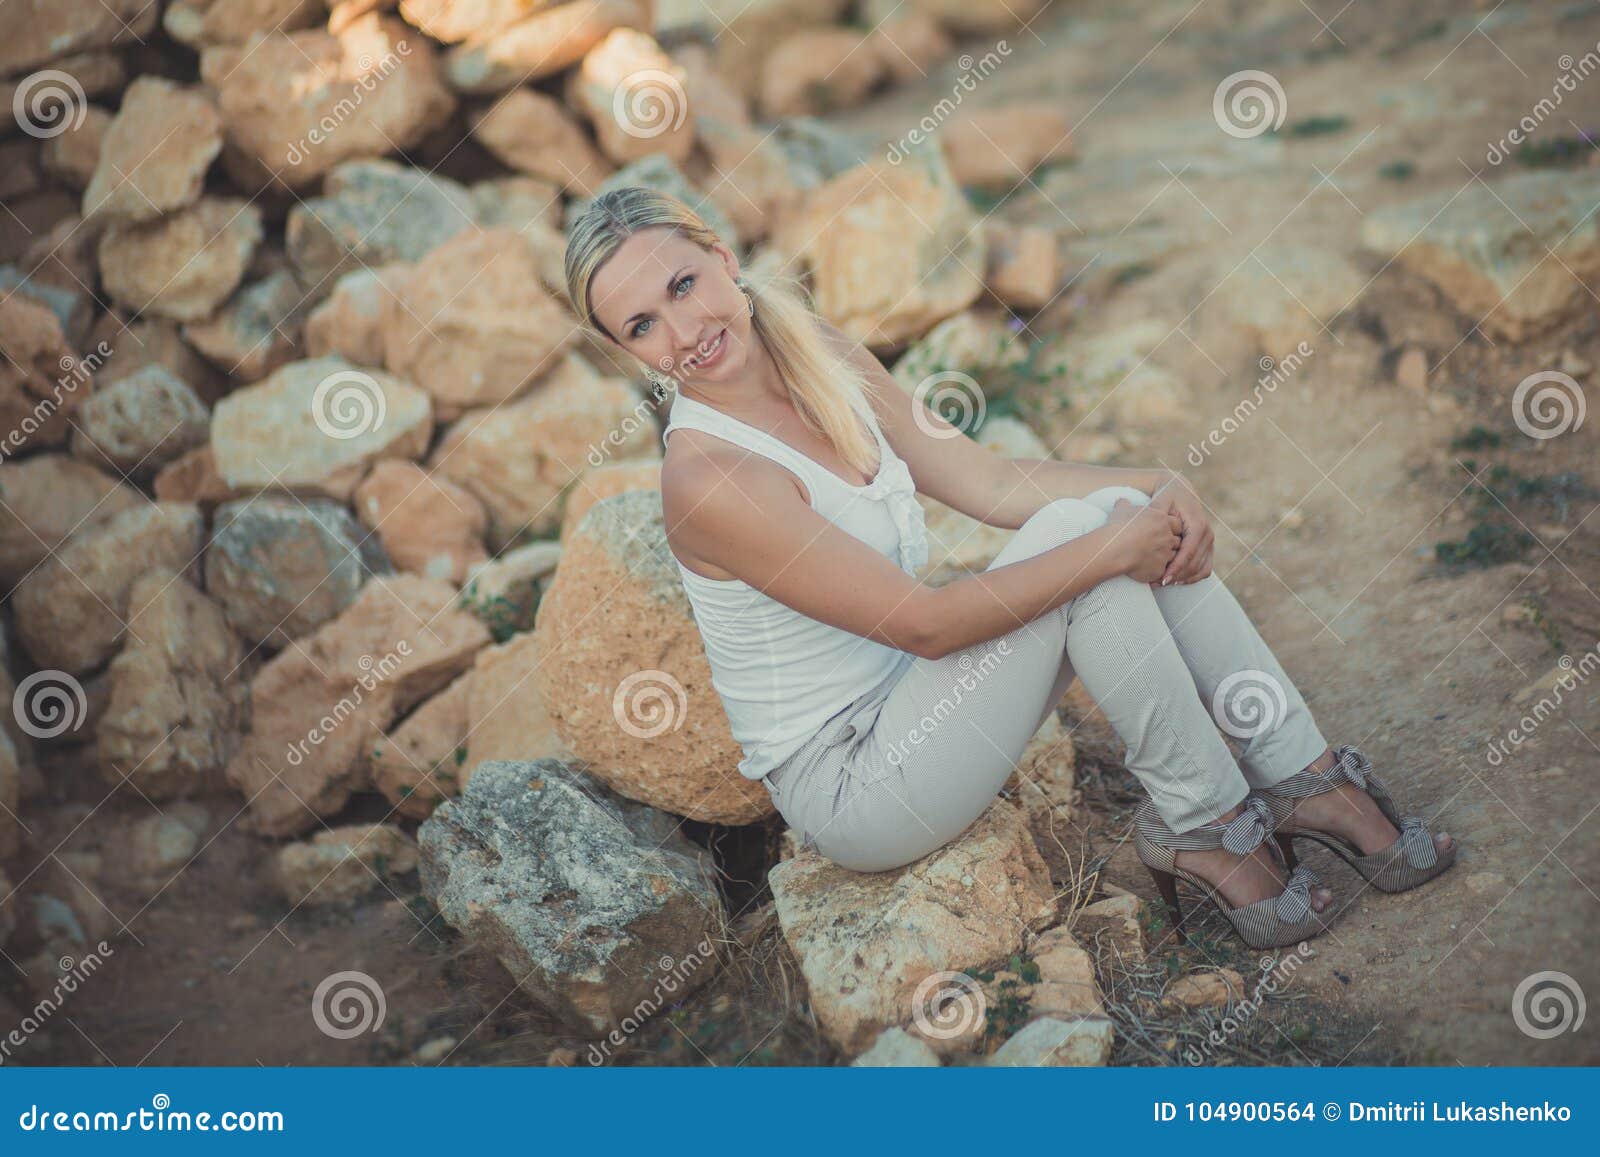 amazing lady blond woman in light white stylish clothes posing on sea side beach air.sparkler girl looking to camera on ancie